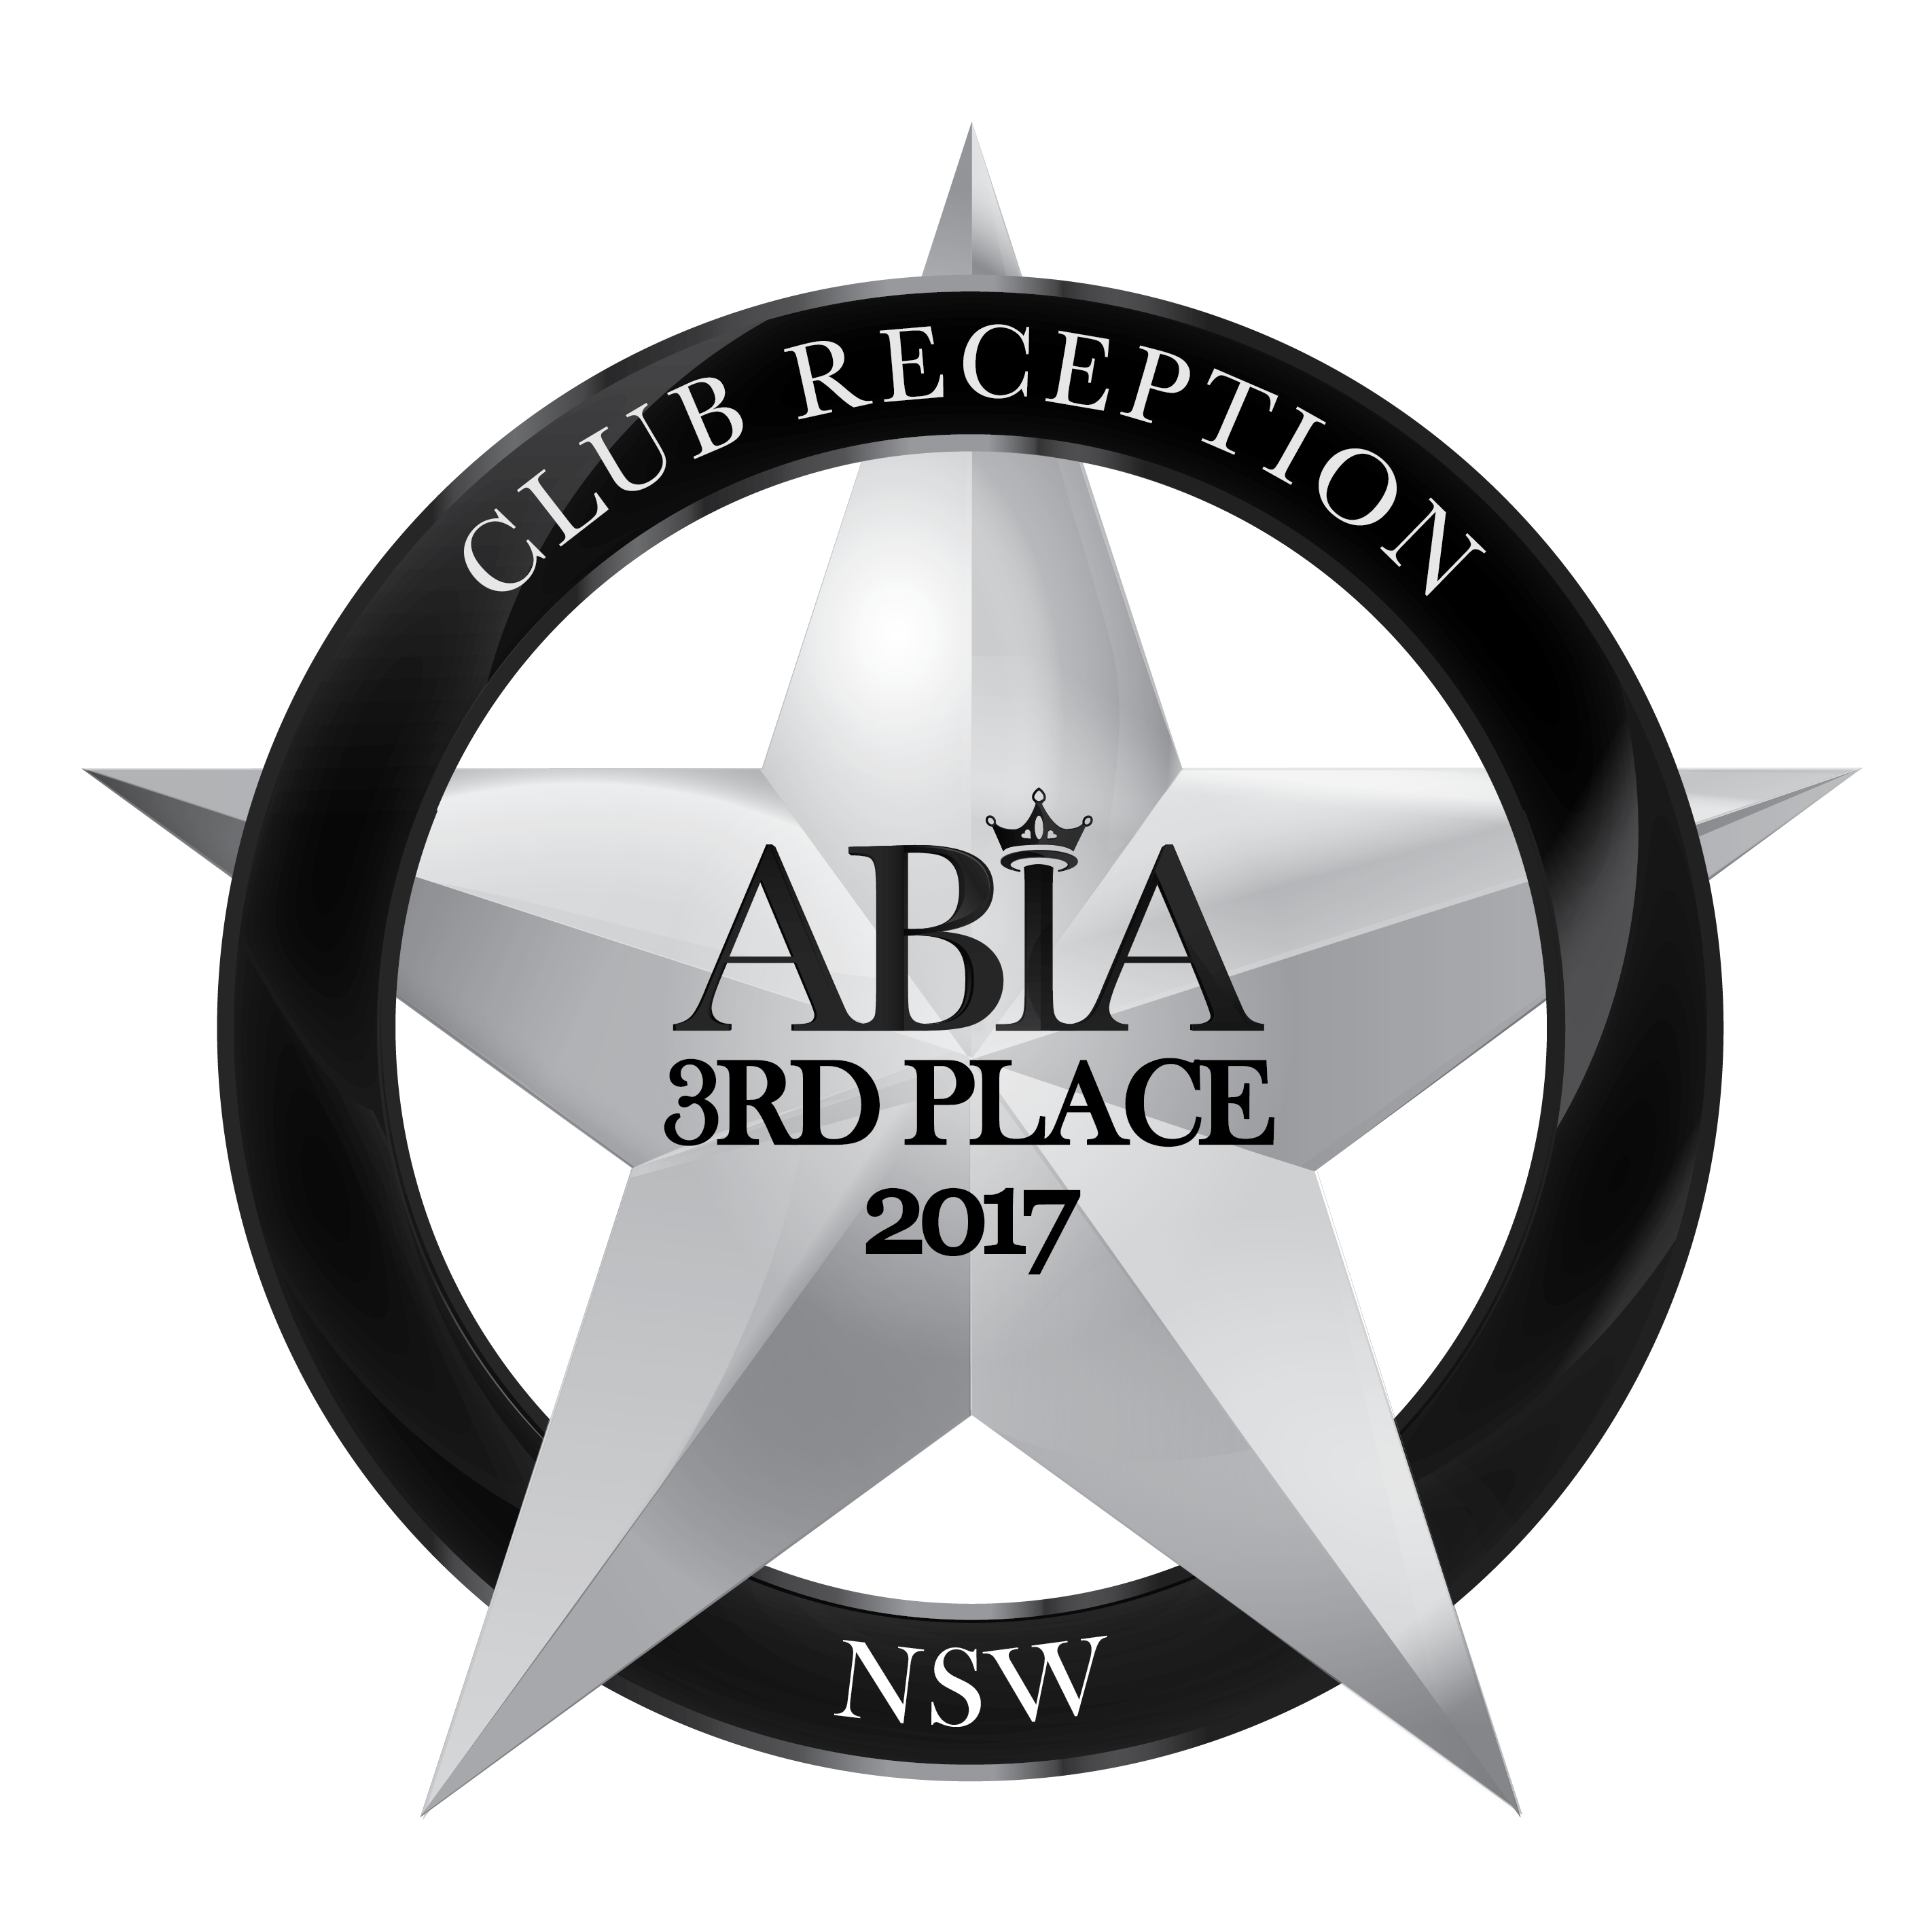 ABIA-Logo-ClubReception-NSW17_3RD PLACE.png